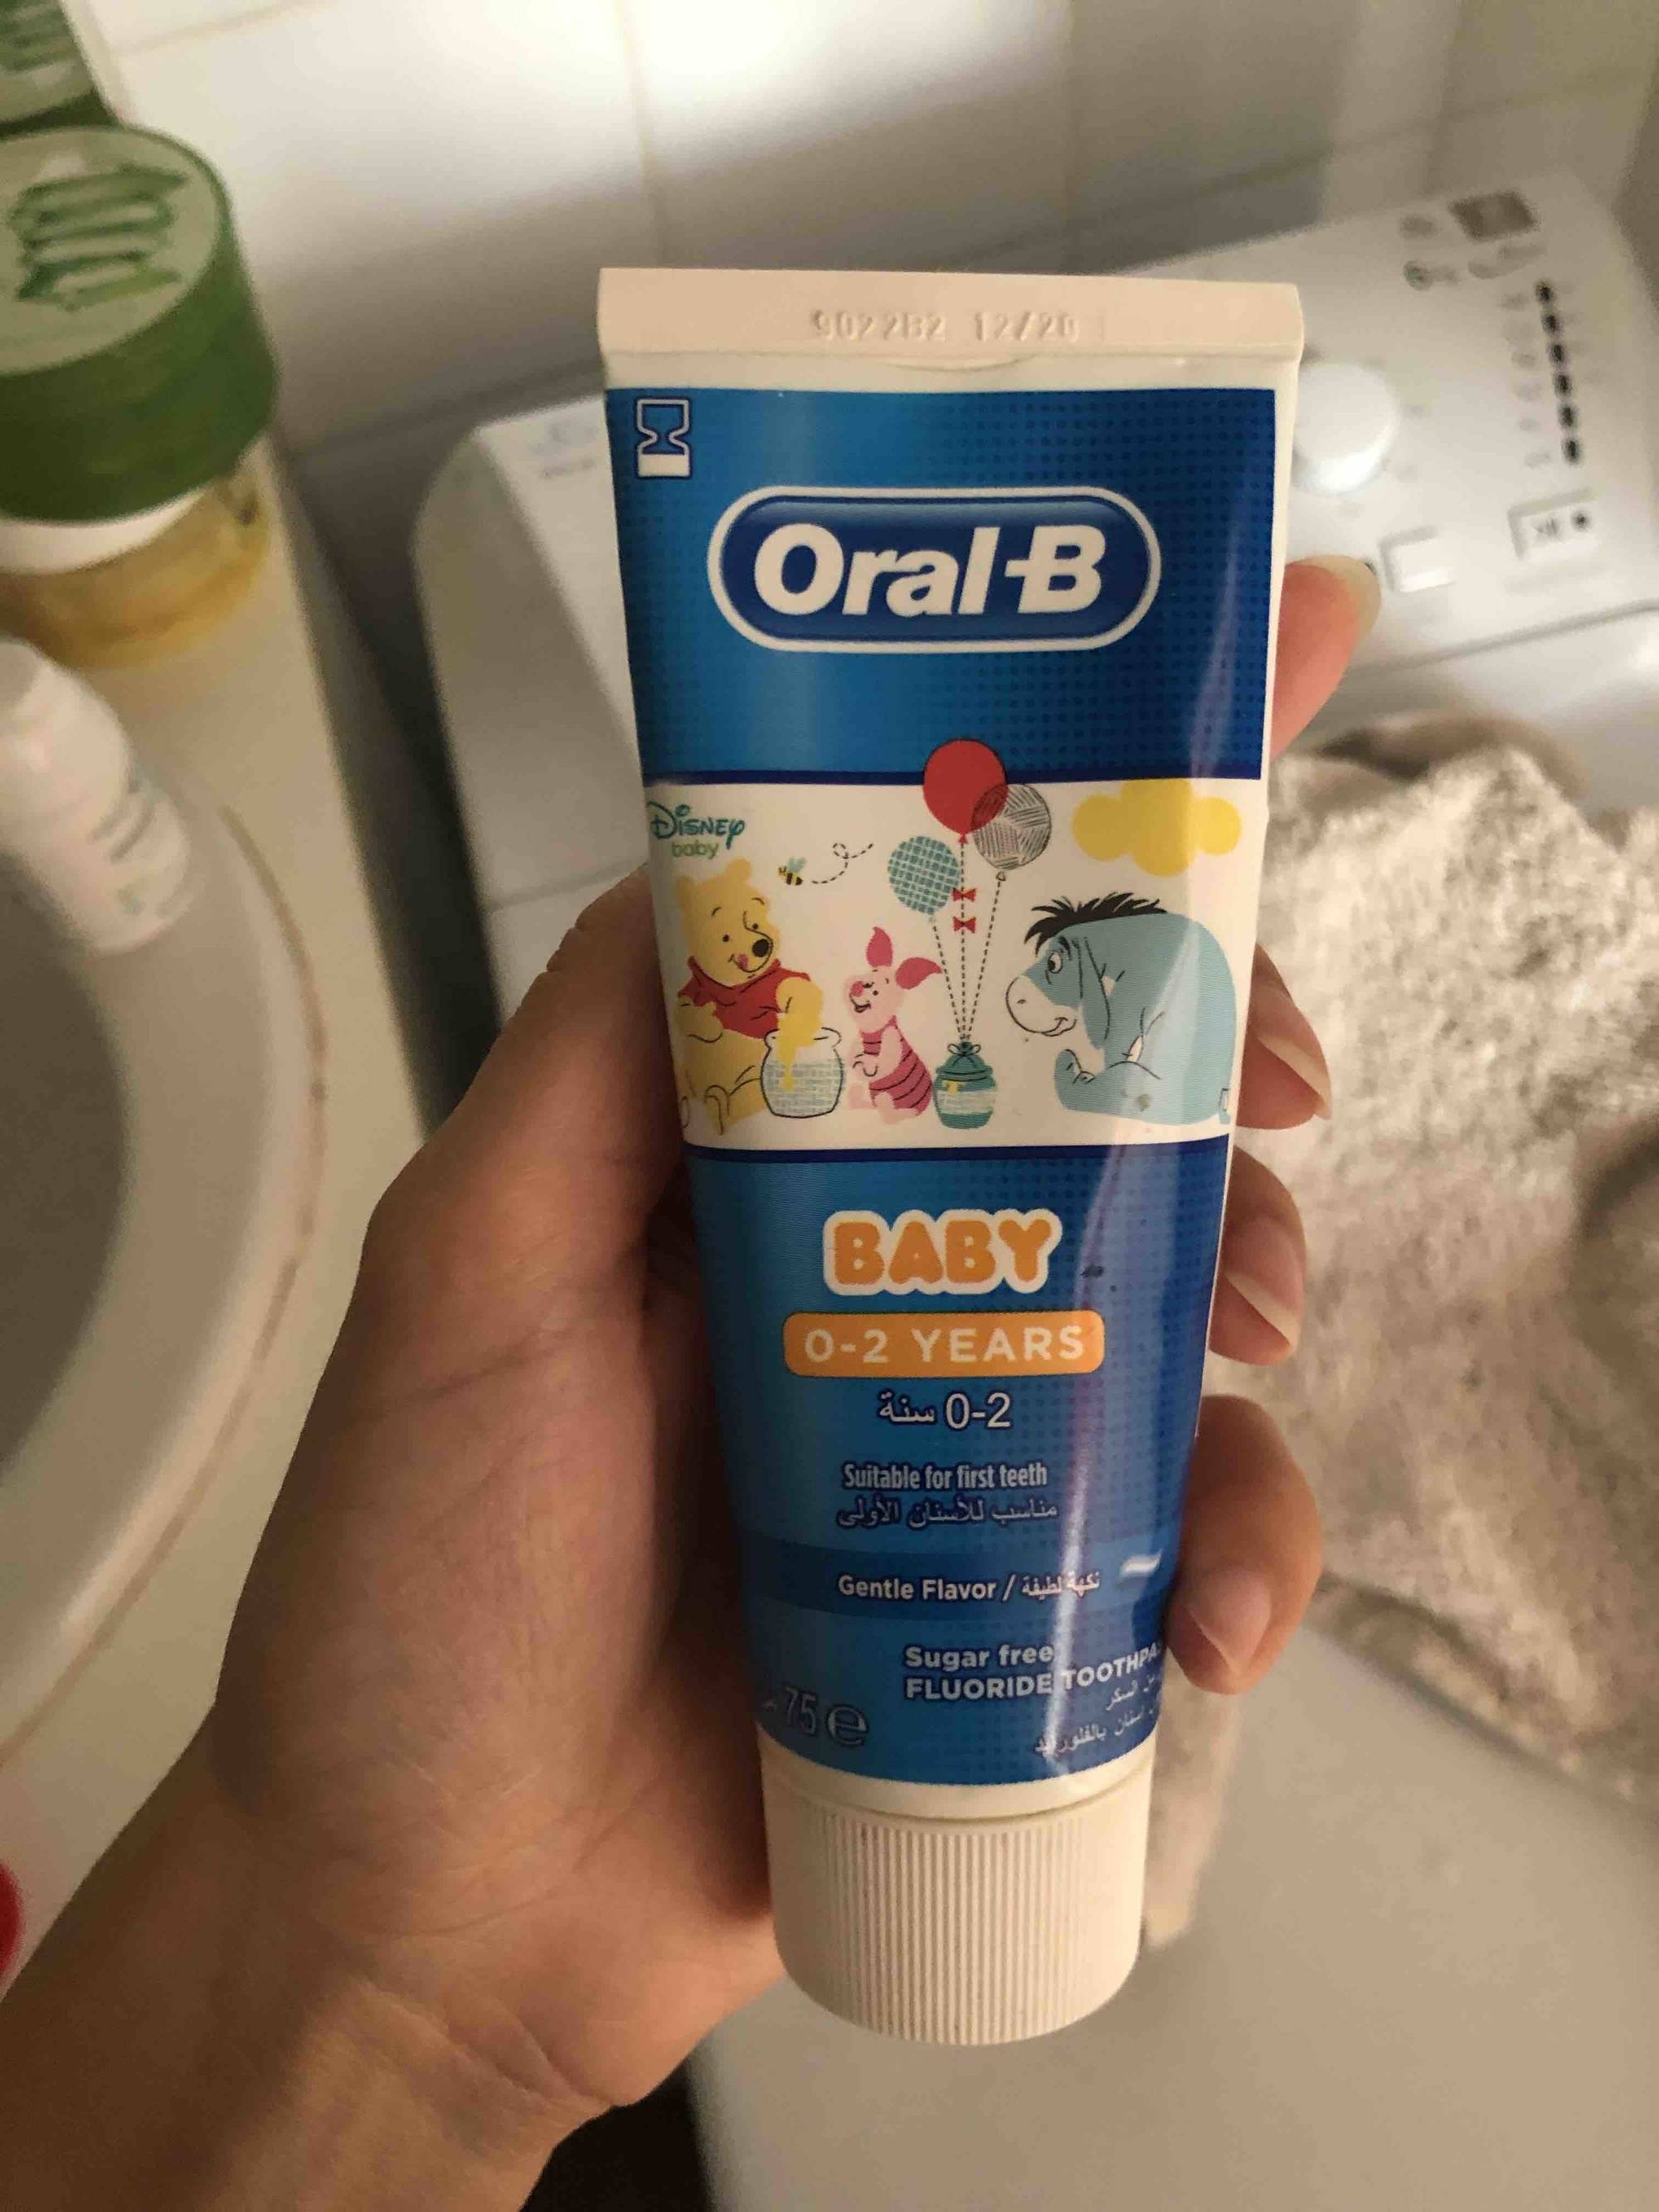 ORAL-B - Baby 0-2 years - Fluoride toothpaste